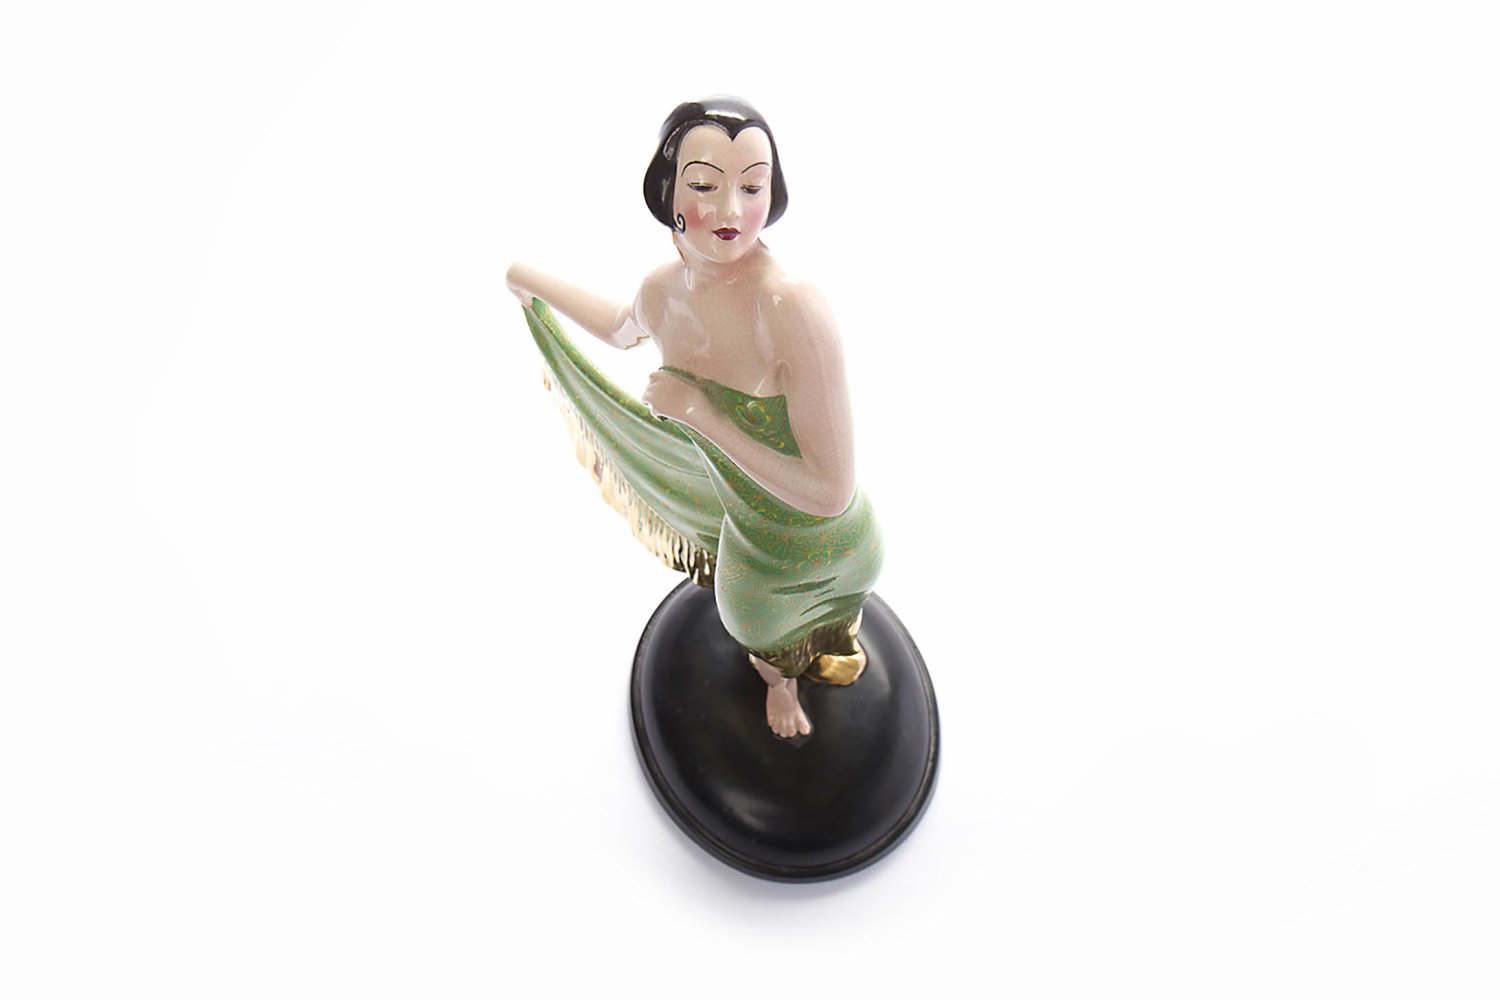 FIELDINGS CROWN DEVON ART DECO FIGURE OF A DANCER the young lady with bobbed hair and gypsy - Image 4 of 4